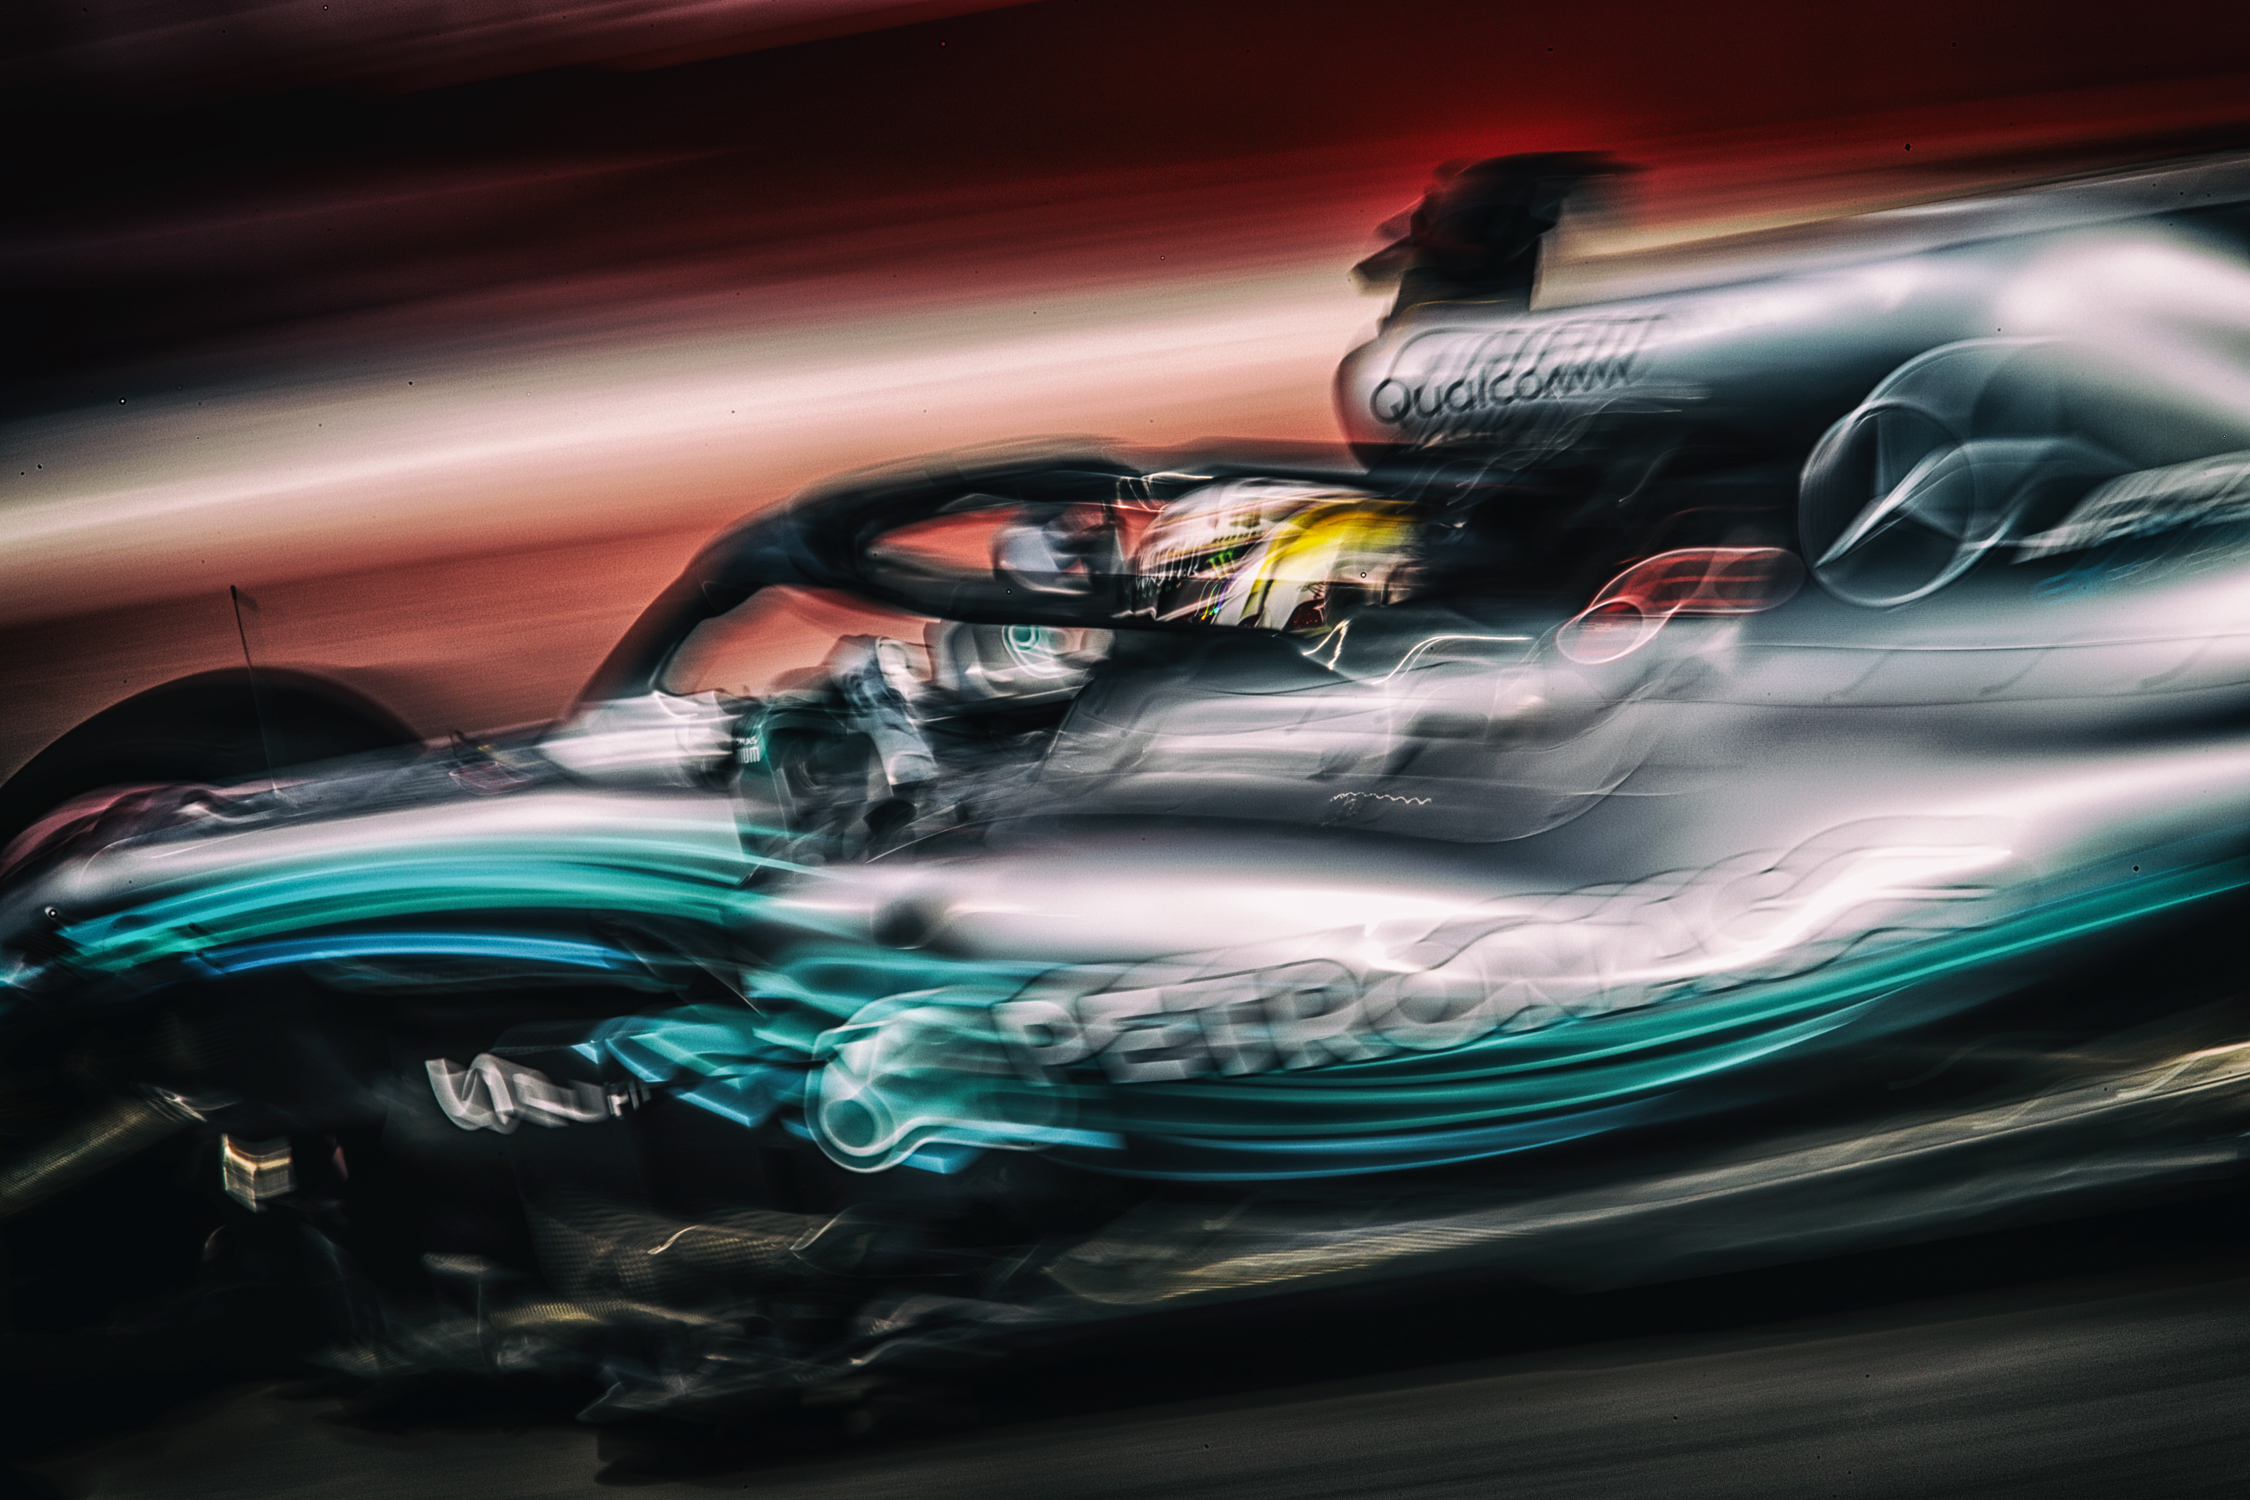 Formula 1 2018: Mexican Grand Prix by Ian Thuillier. 